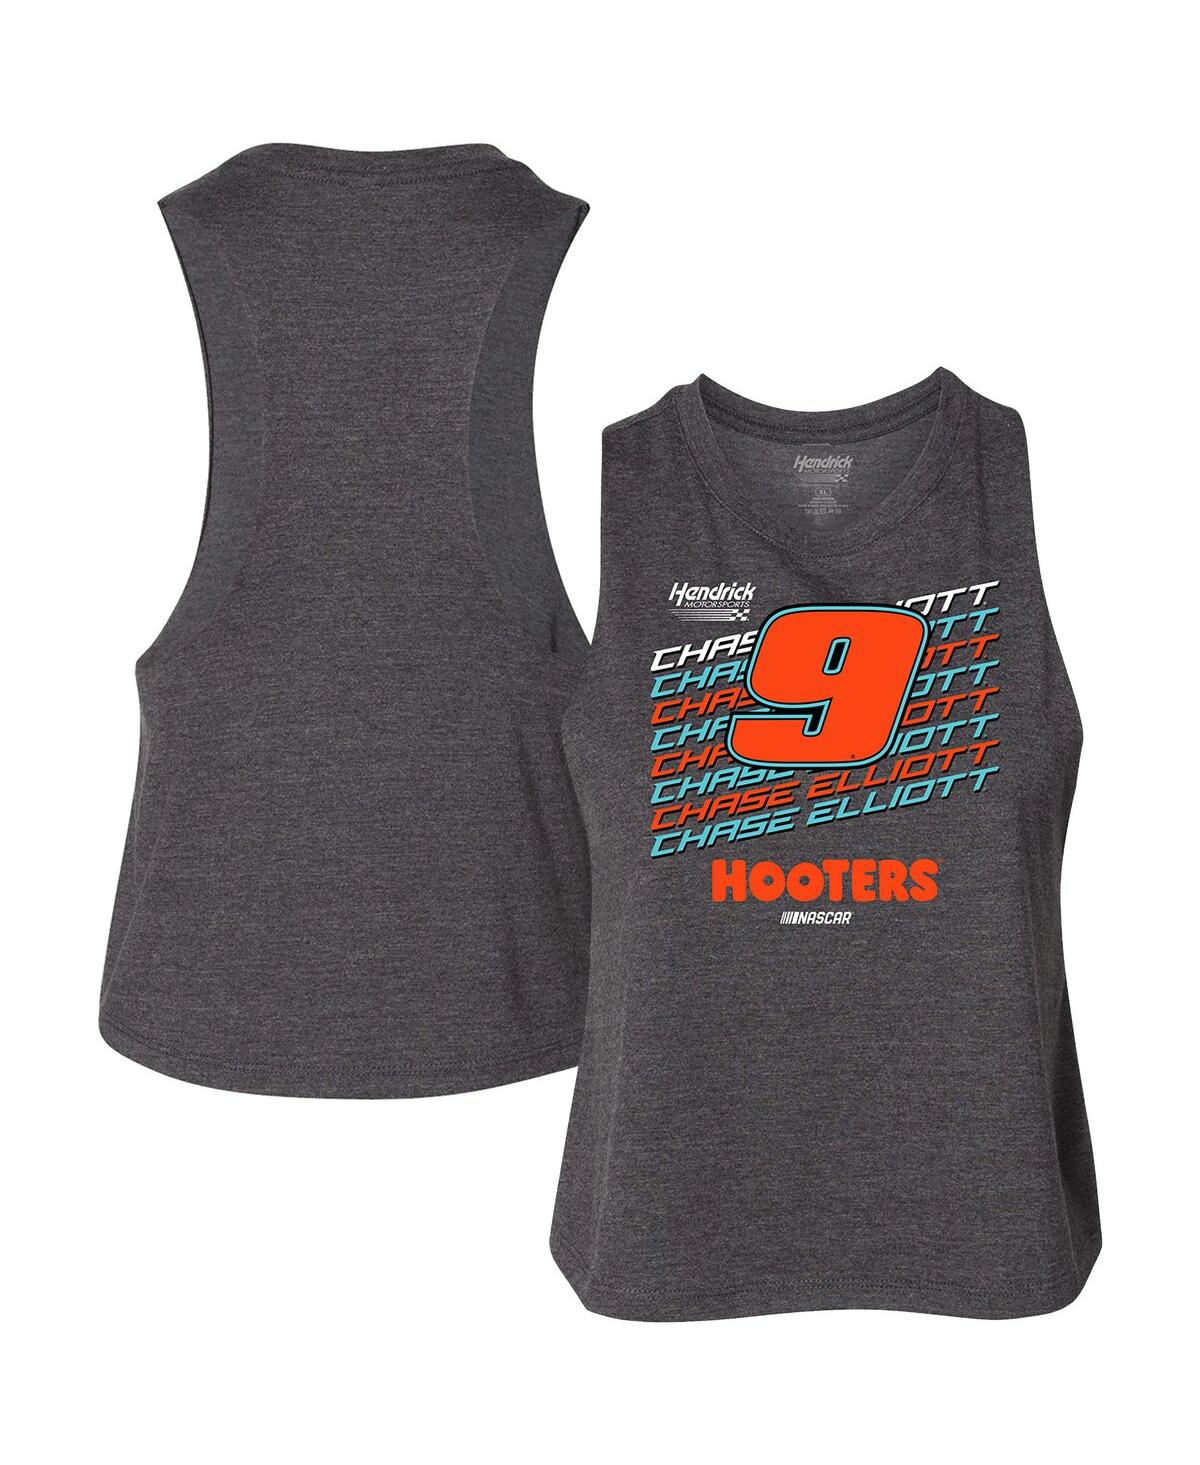 Women's Hendrick Motorsports Team Collection Heather Charcoal Chase Elliott Hooters Racer Back Tank Top - Heather Charcoal